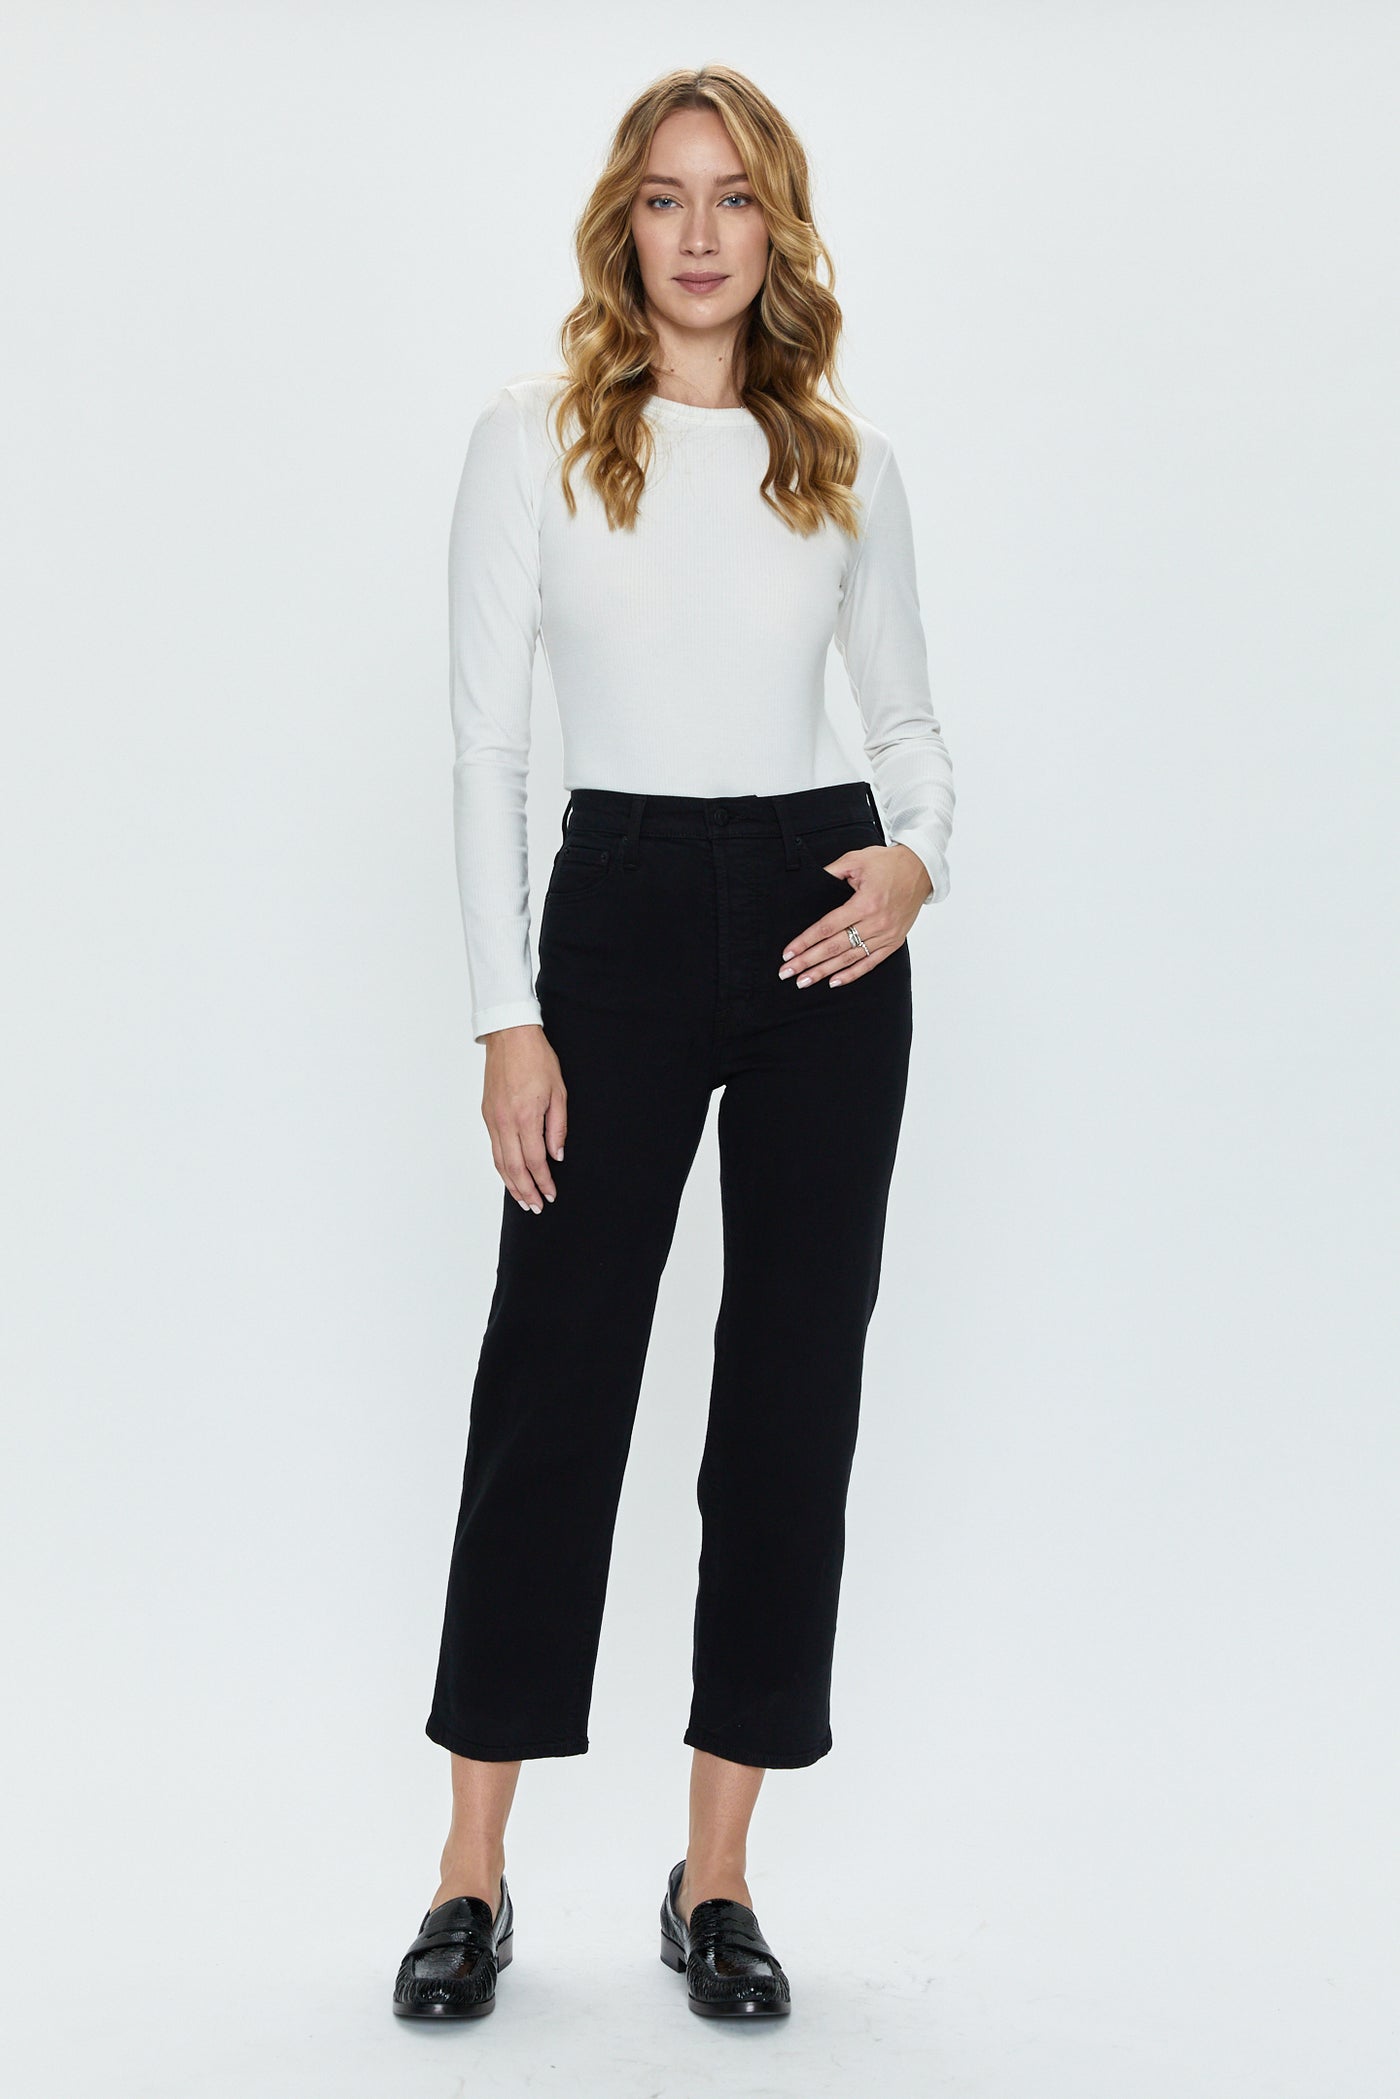 A Charcoal Black High-Waist, trumpet-cut Details Pant with Si